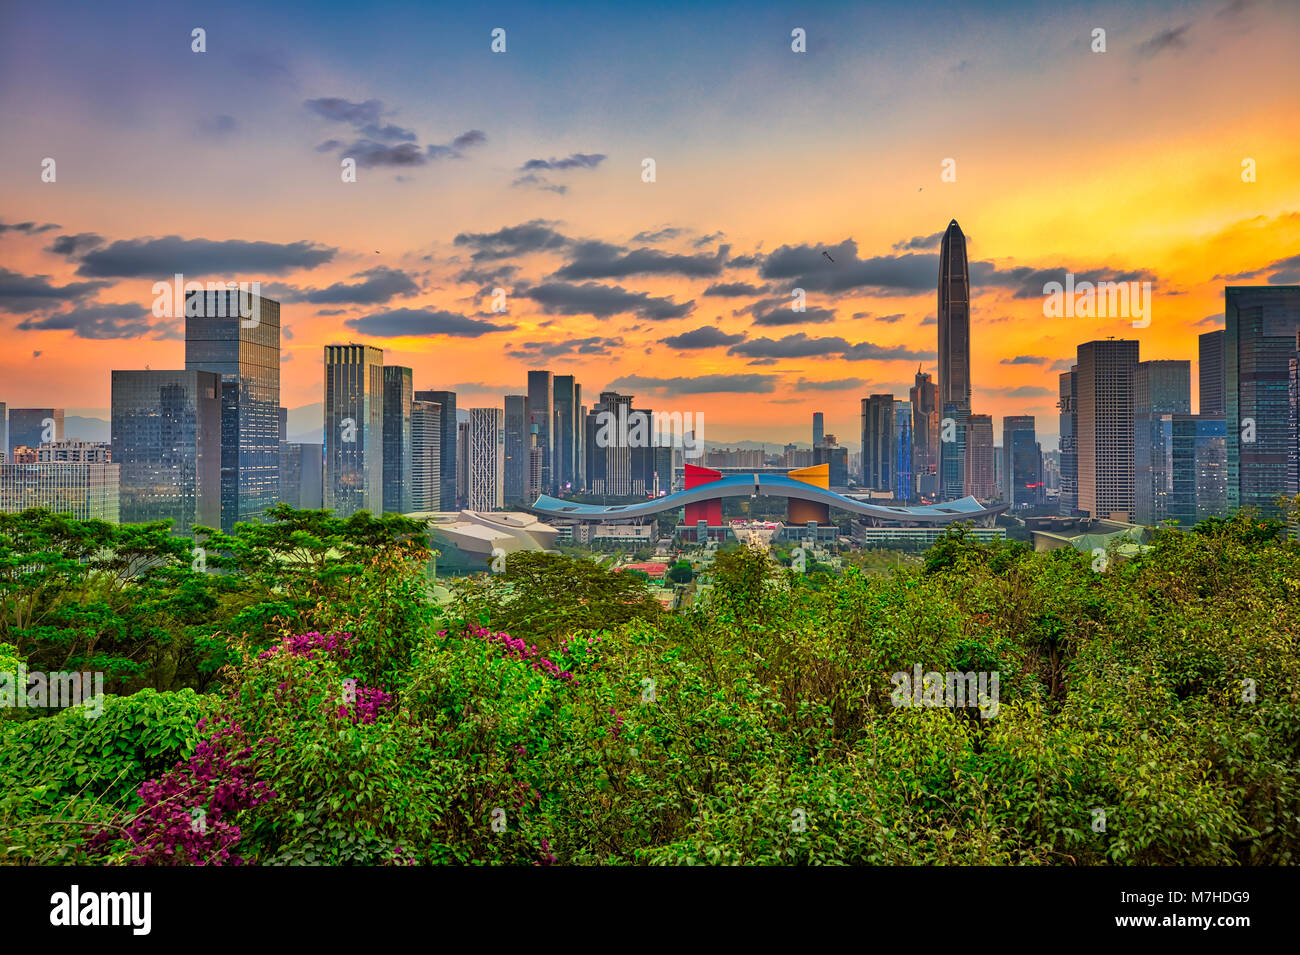 Skyline of Shenzhen city with many skyscrapers and stunning cloudscape at twilight from the top of Lianhua Hill in the city center, Guangdong province Stock Photo